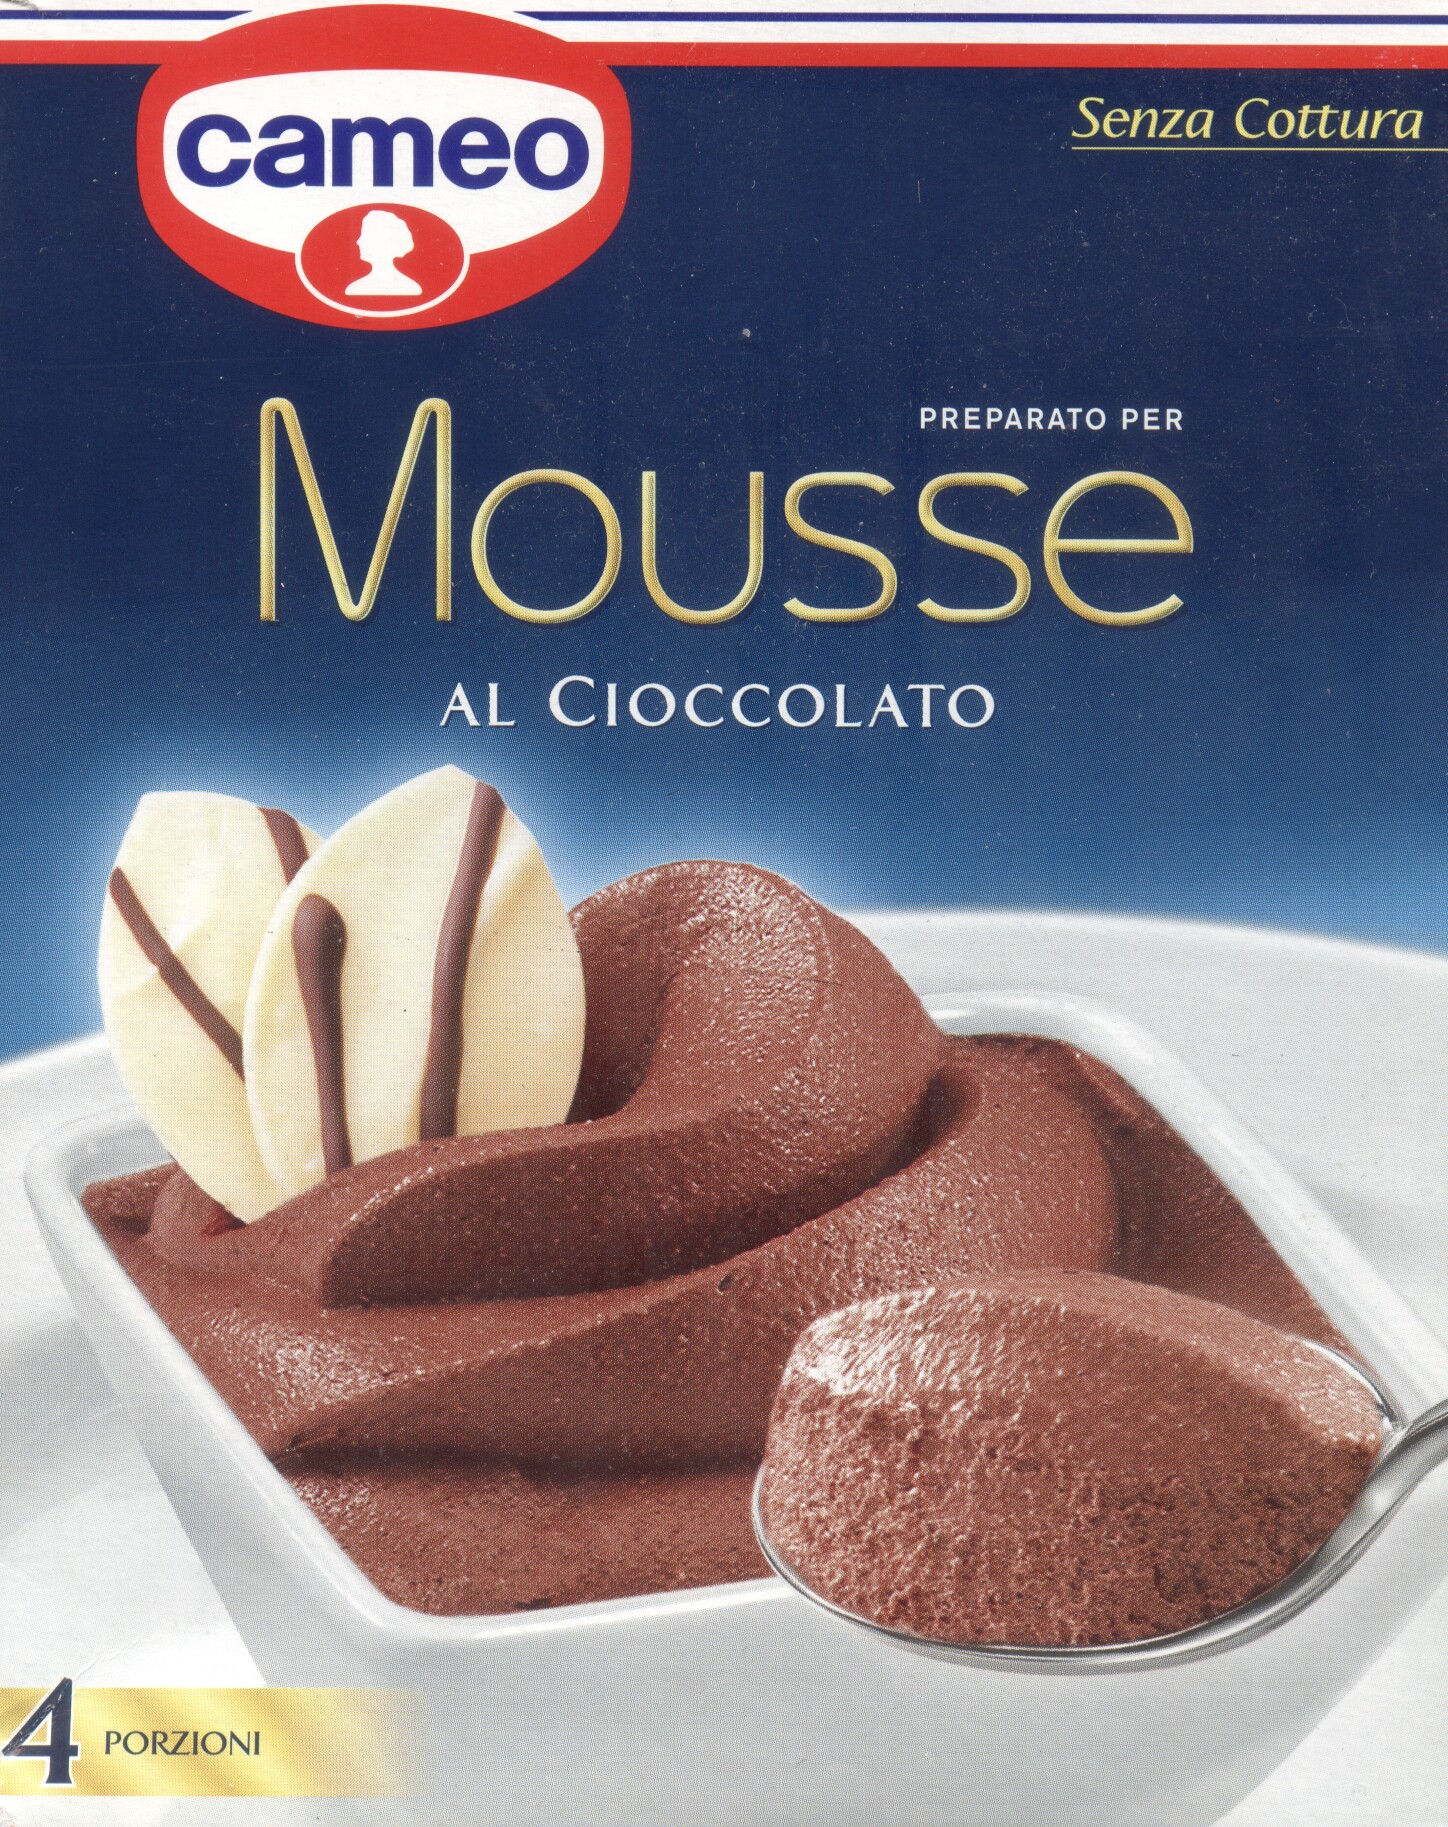 Mousse Cameo